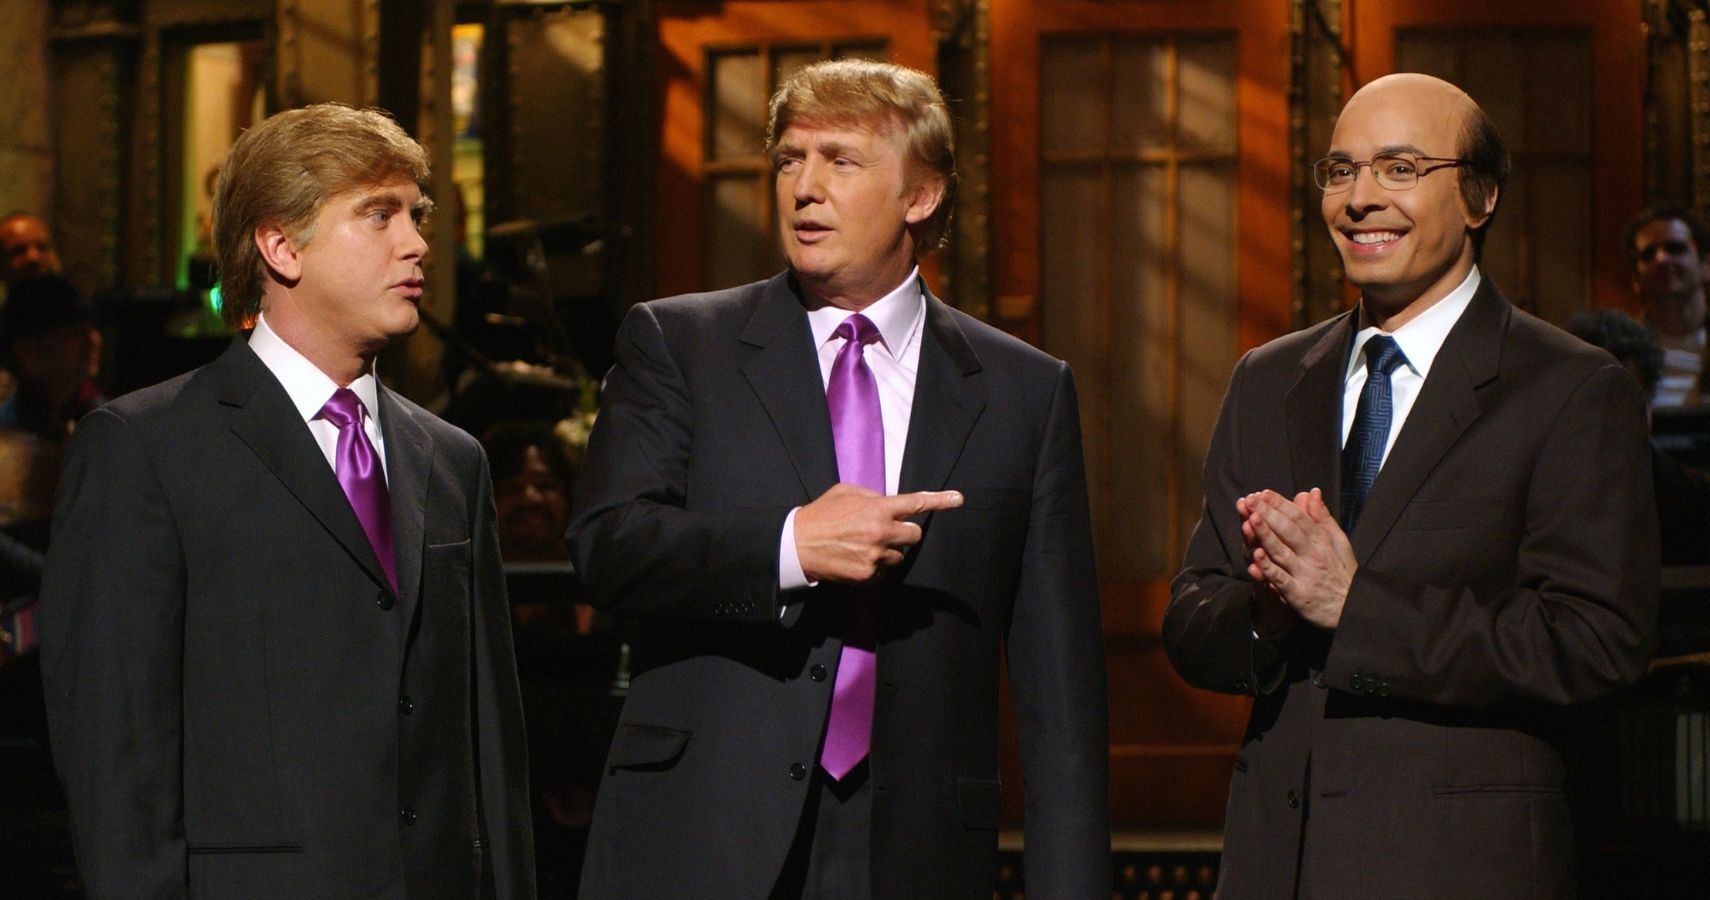 SNL 10 Things Fans Never Knew About The Hit Comedy Show